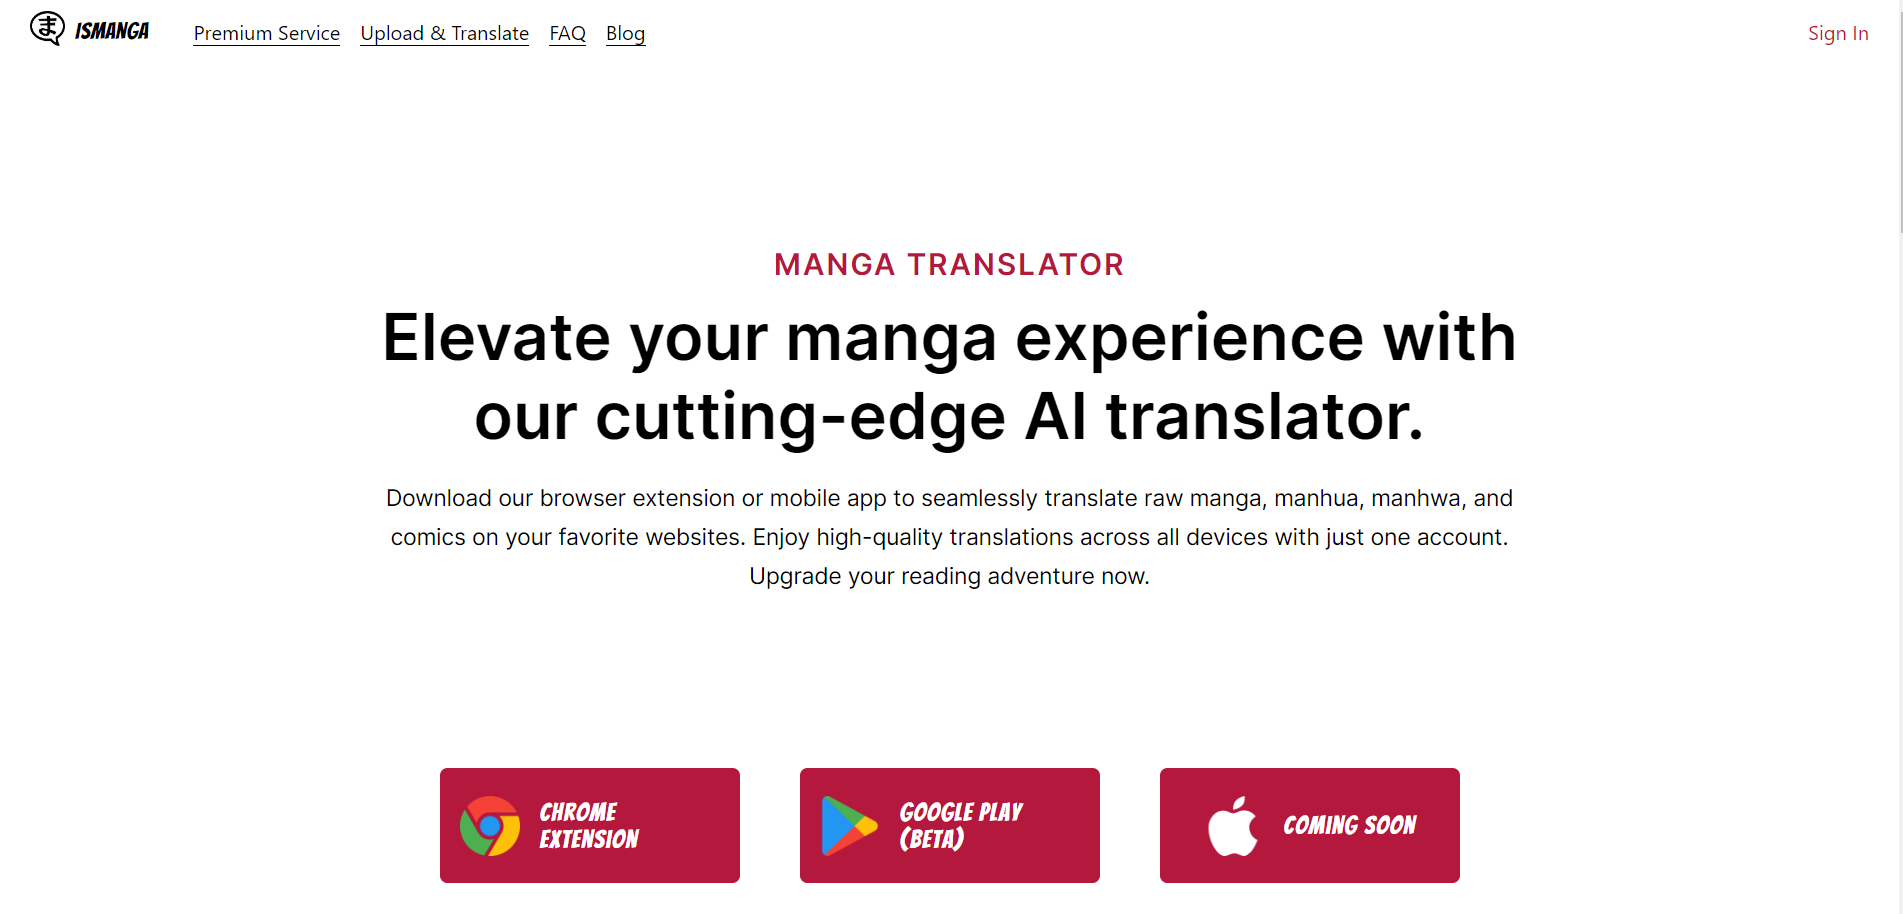  Empower your management journey - ismanga.com homepage, showcasing words to elevate your manage experience.